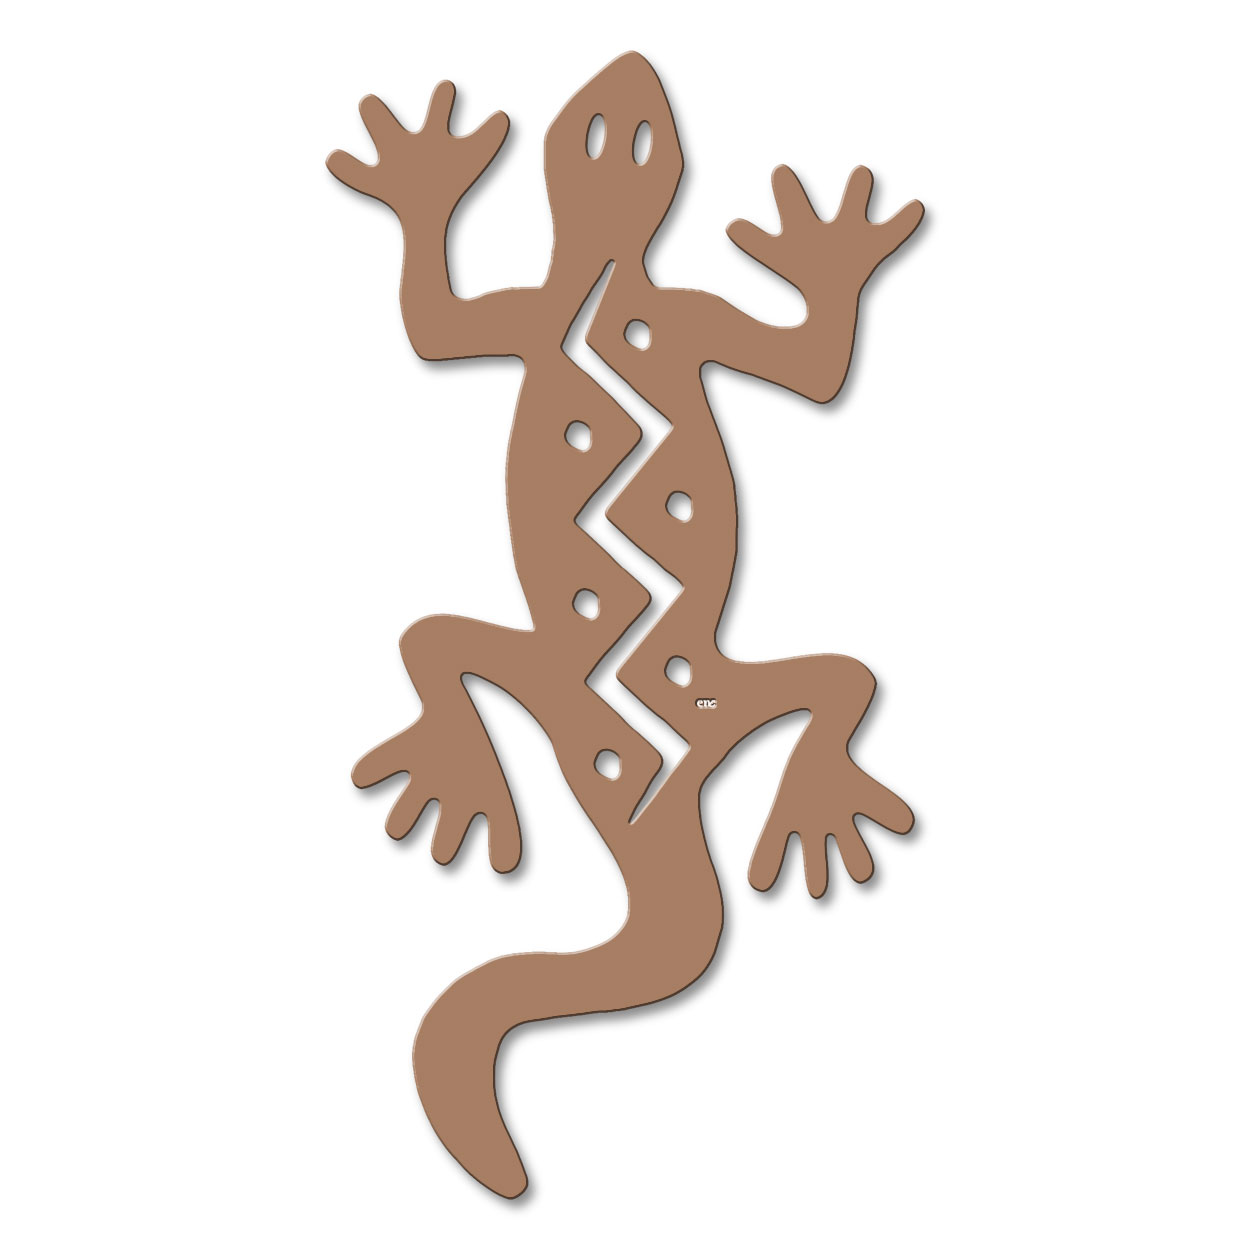 625038 - 18 or 24in Metal Wall Art - Climbing Gecko - Choose Color